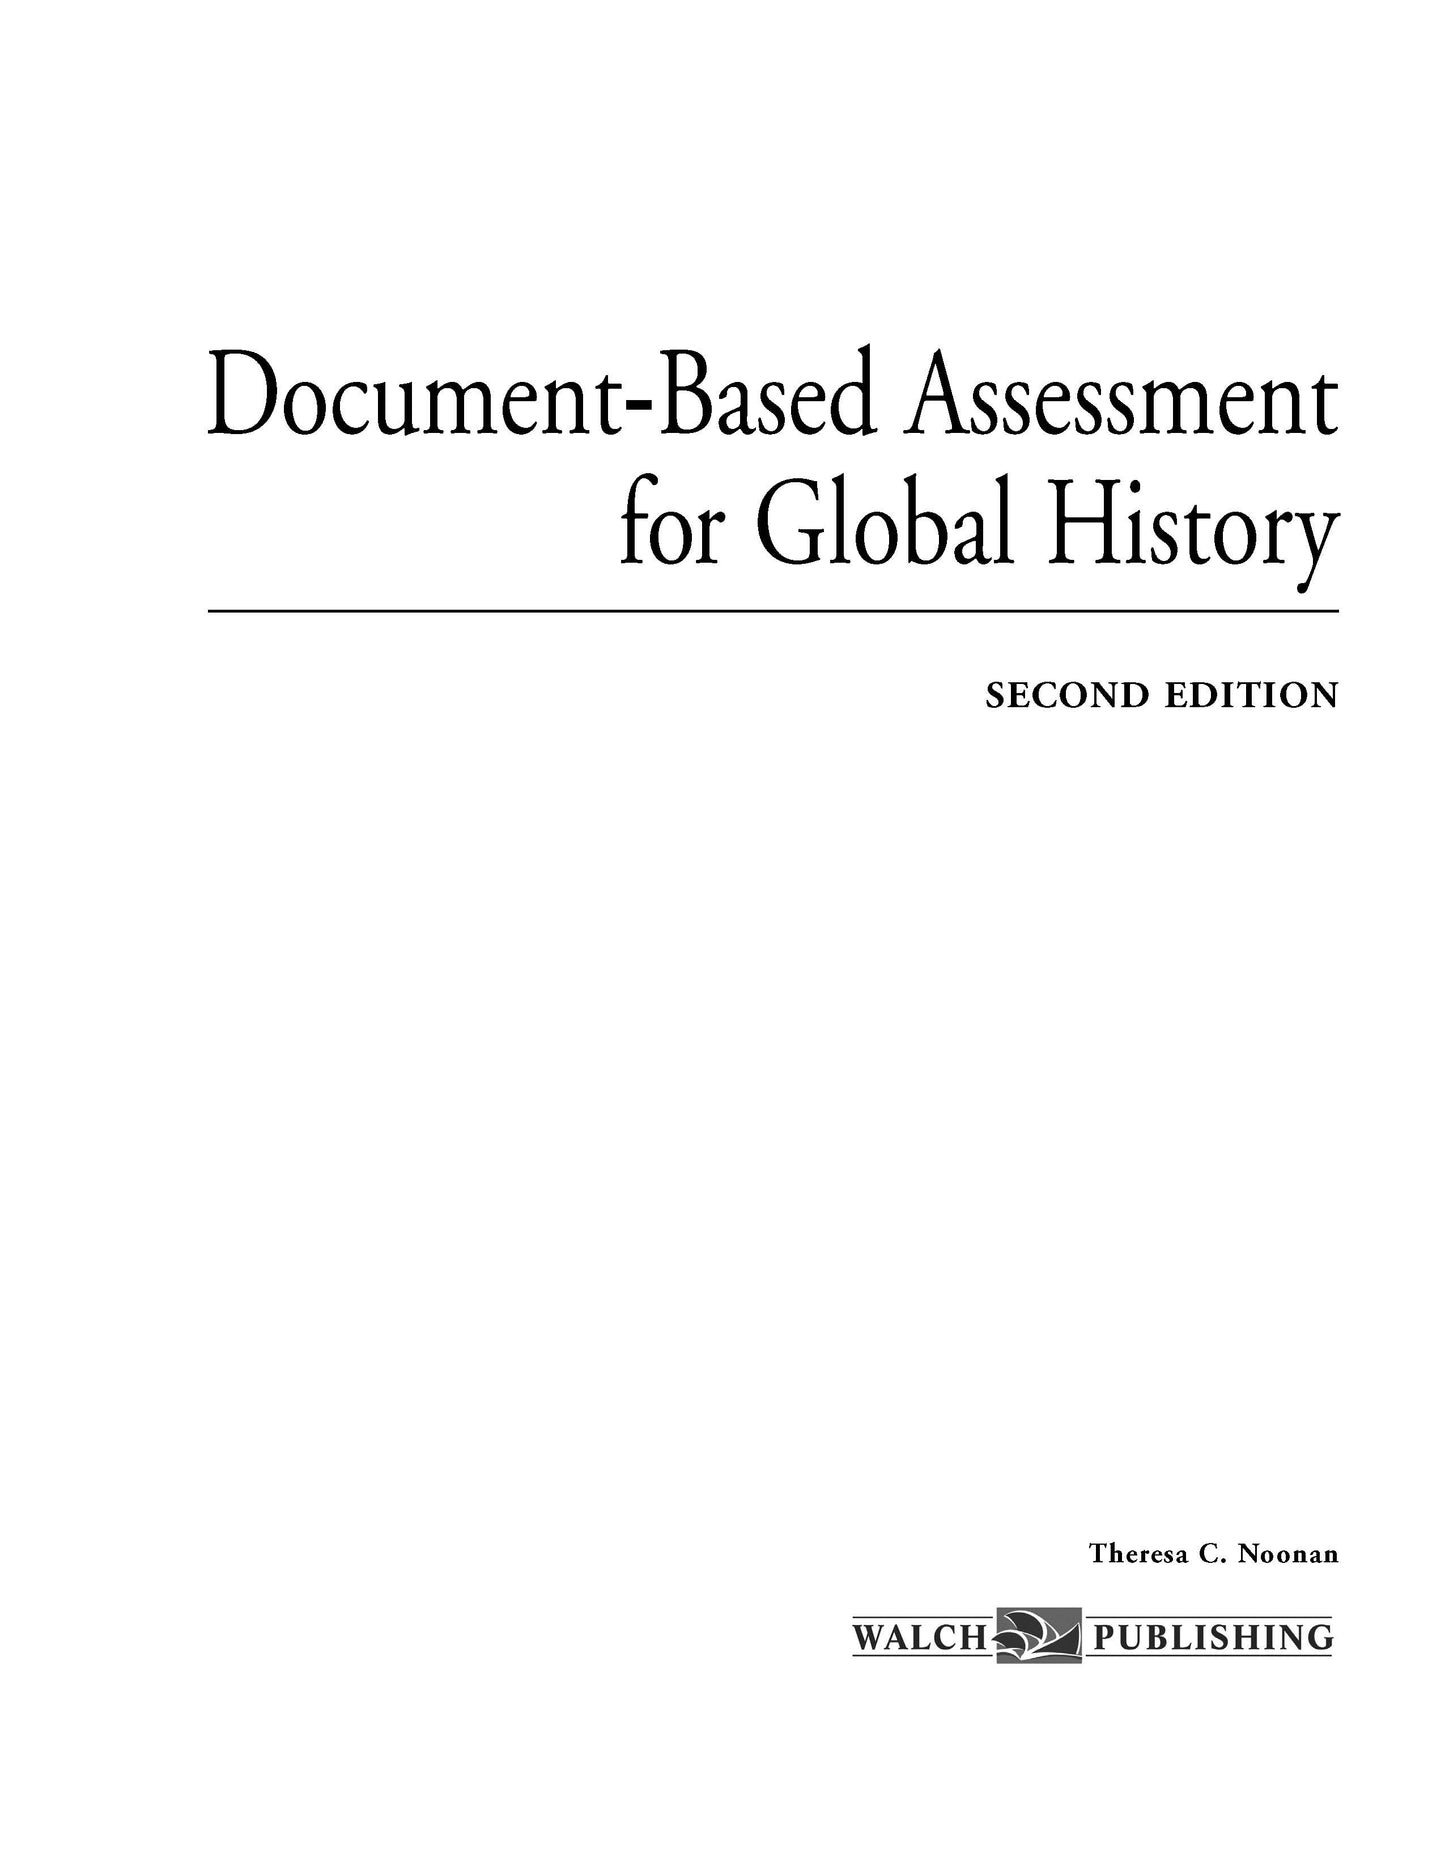 Bright Education Australia, Teacher Resources, Book, History, Document Based Assessment for Global History 